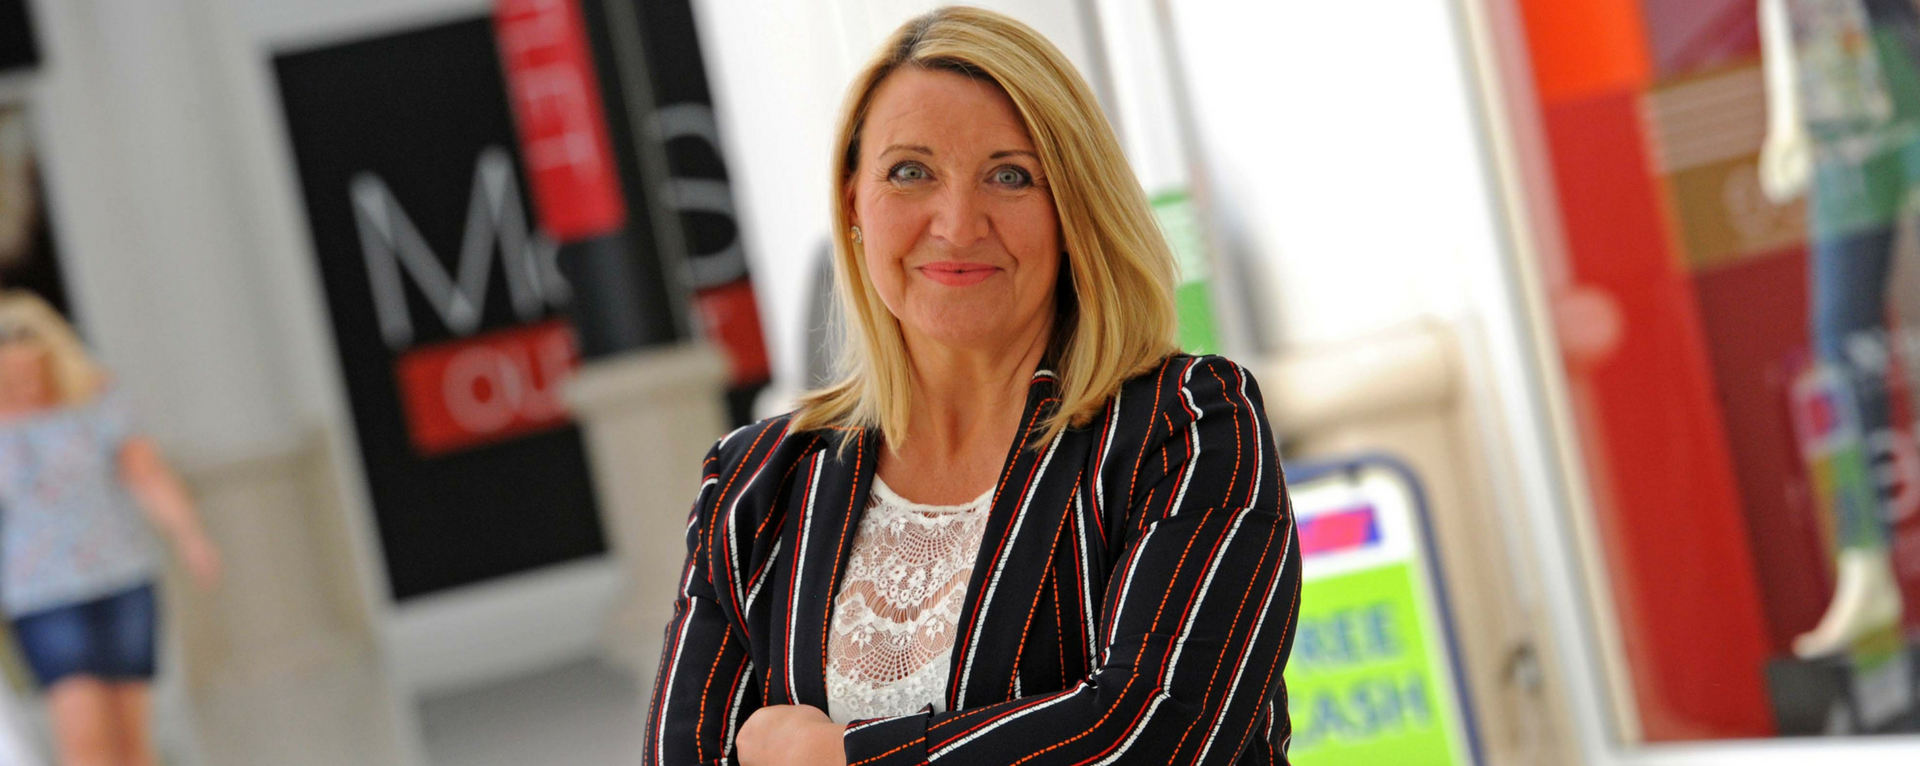 Sugar PR hired for shopping centre PR brief to drive footfall